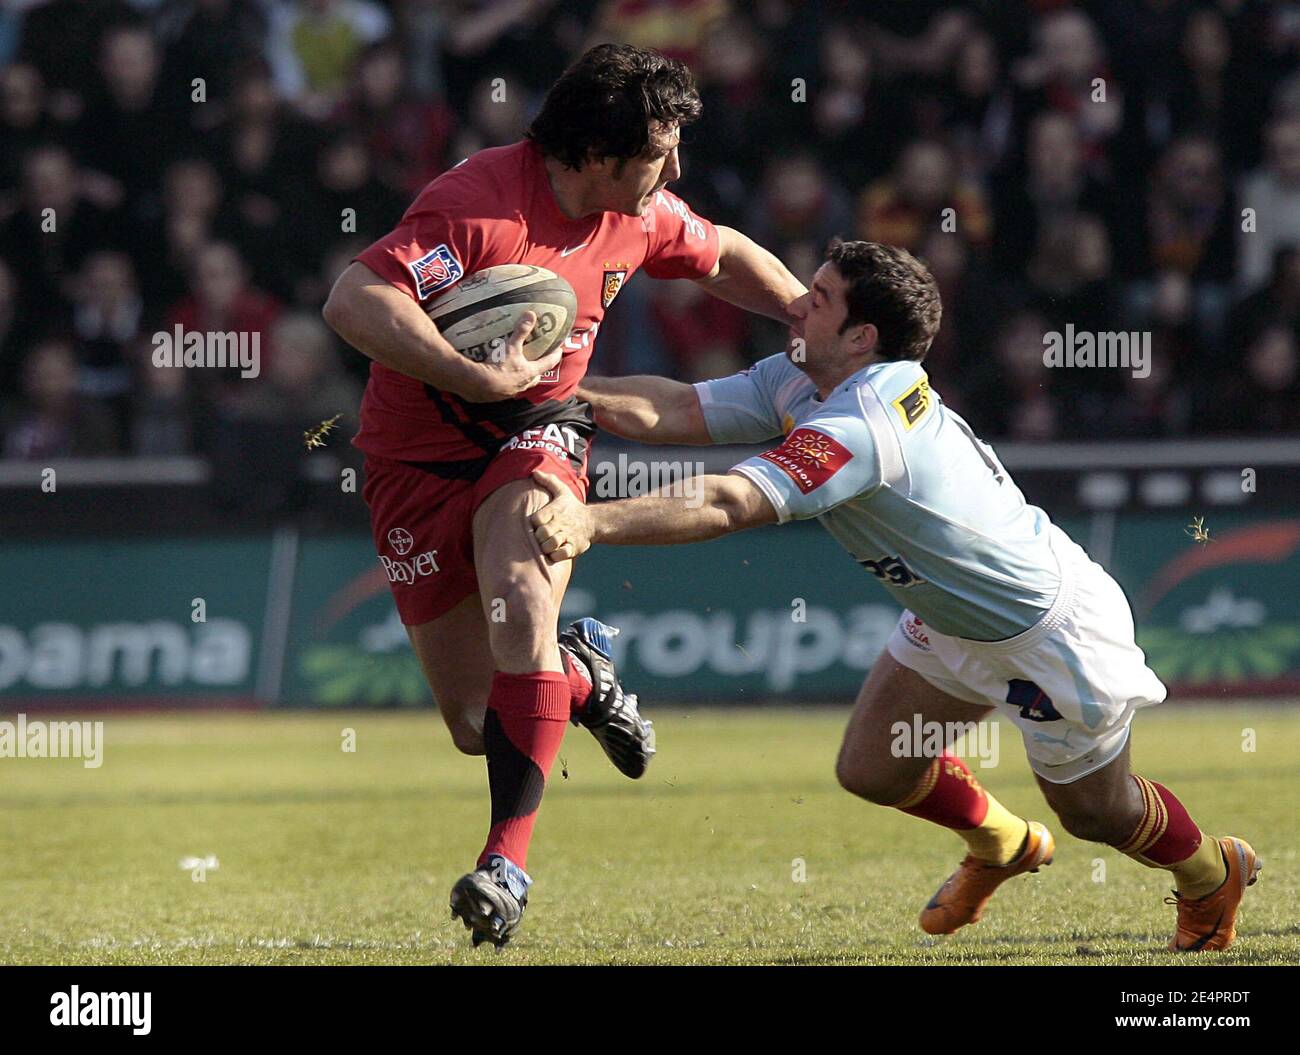 Toulouse's Byron Kelleher during the French Top 14 Rugby match, Toulouse vs  Perpignan at the Ernest Wallon Stadium in Toulouse, France on February 16,  2008. The Stade Toulousain won 41-15. Photo by